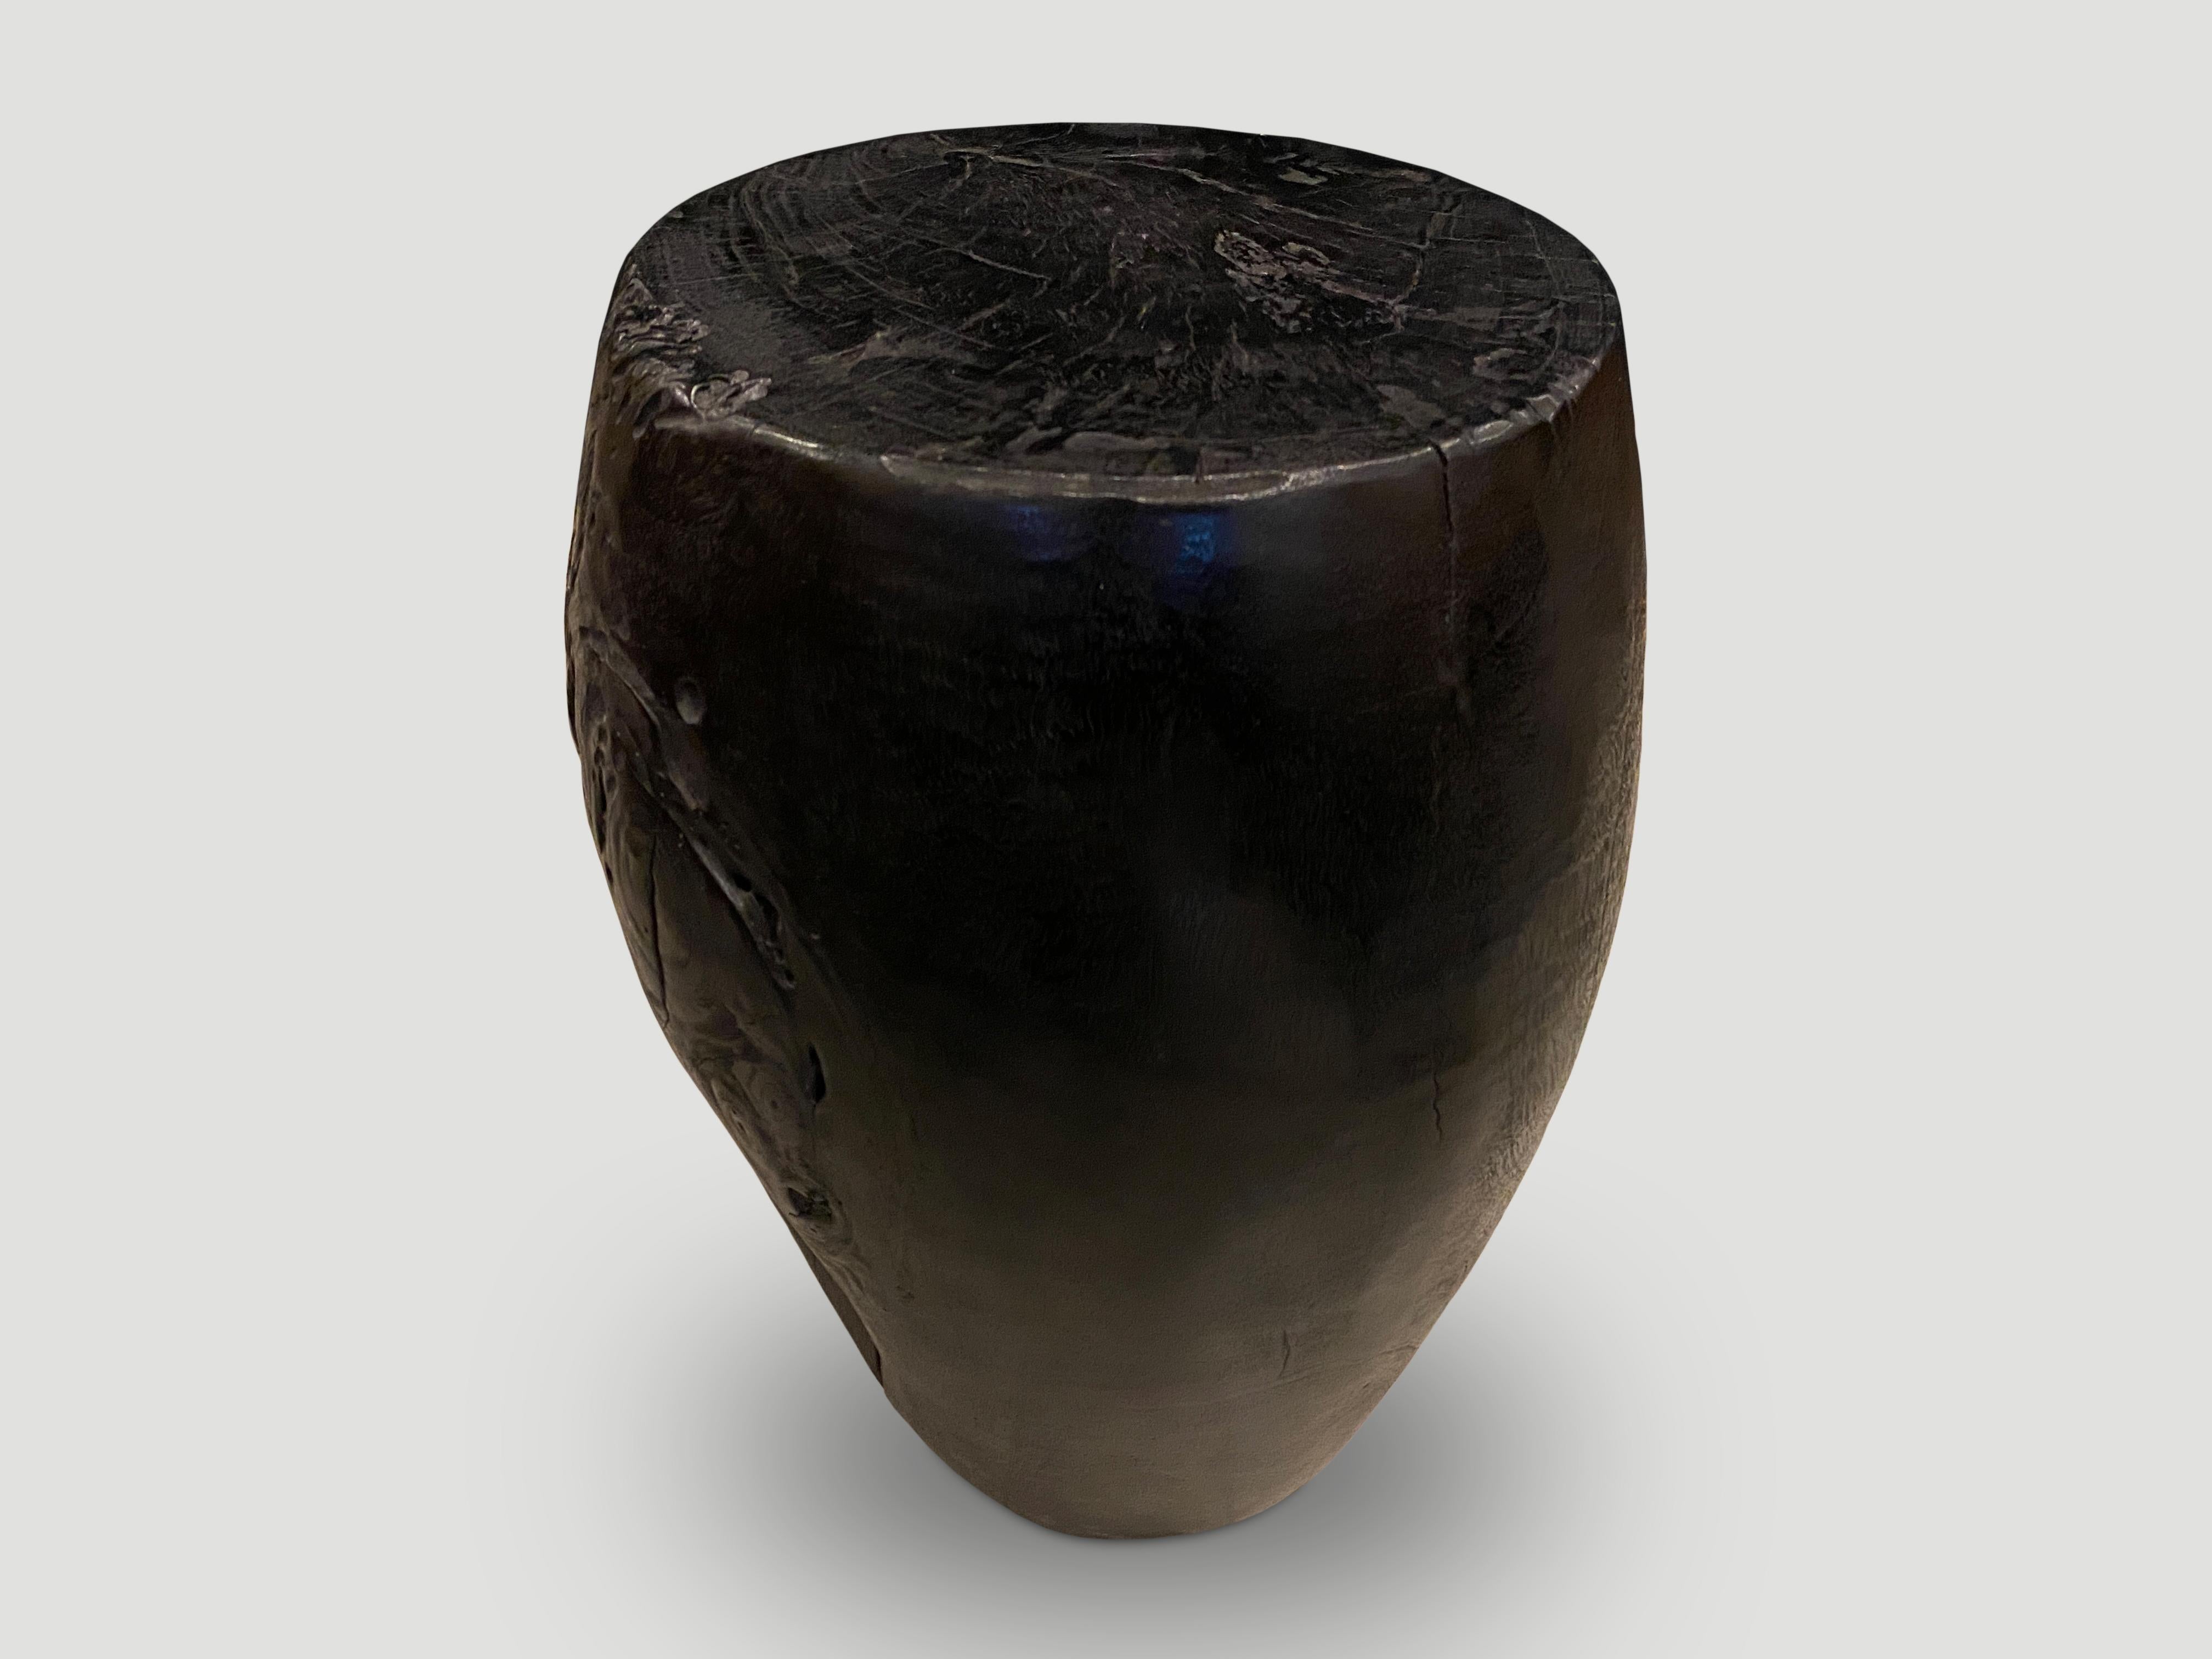 Reclaimed Mango wood charred and hand carved into this stunning drum shape whilst respecting the natural organic wood. Burnt, sanded and sealed revealing the beautiful wood grain.

The Triple Burnt Collection represents a unique line of modern